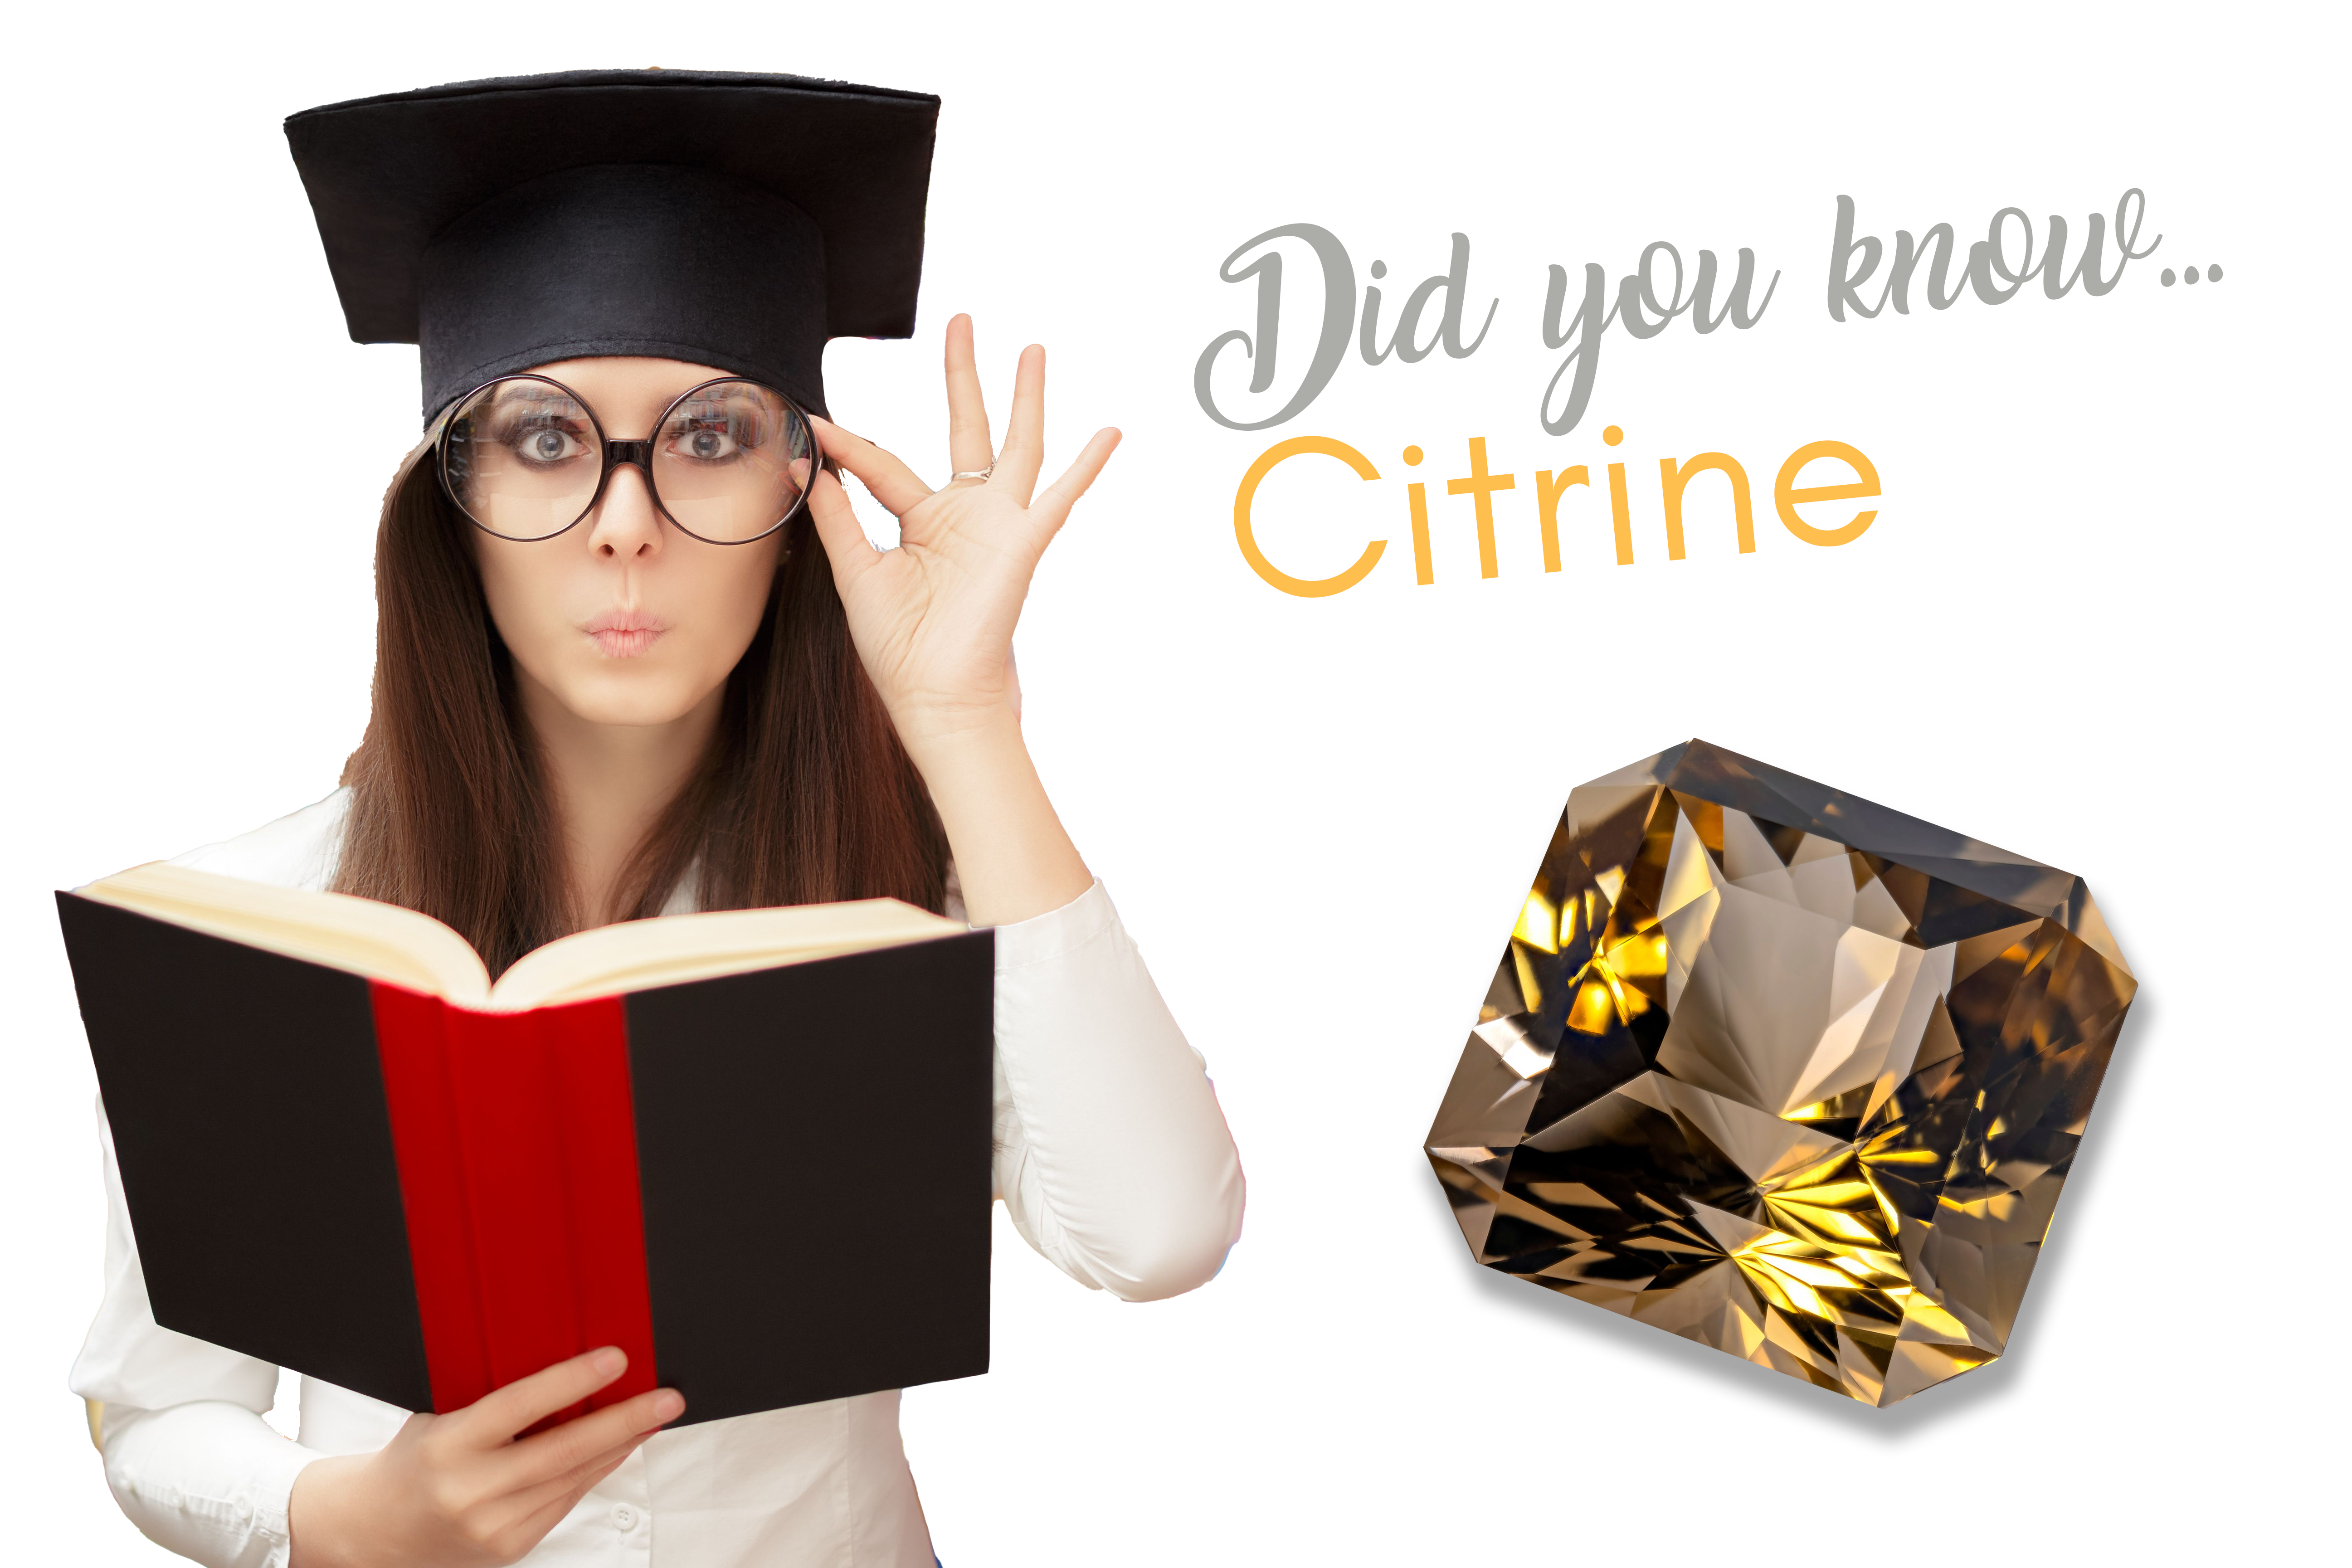 Bet You Didn't Know This About Citrine ...